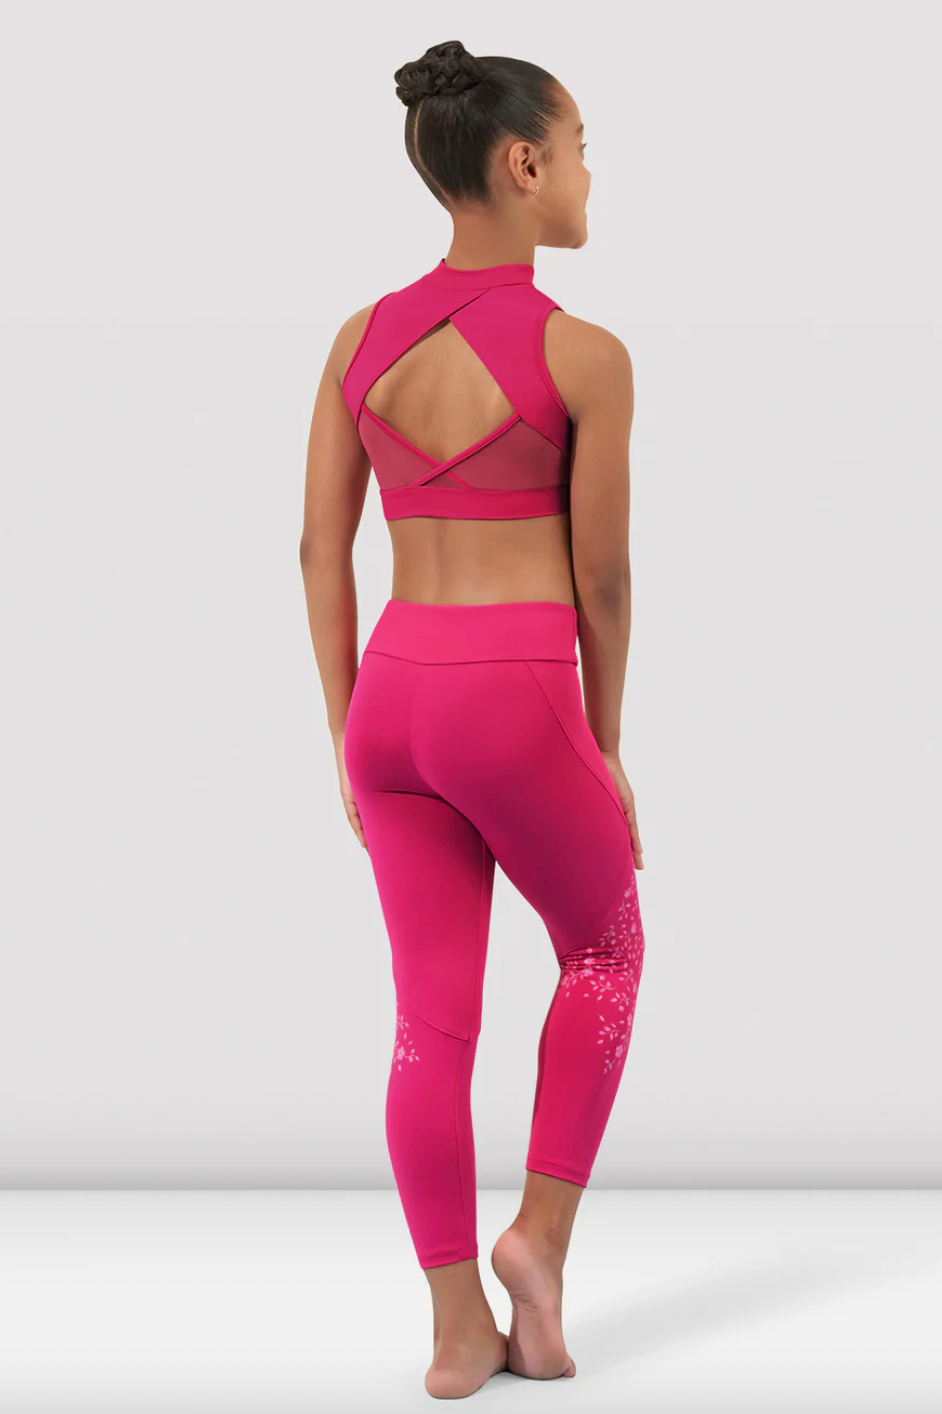 Women's Activewear Set: Contrasting Color Tight Top & Trousers for Yoga,  Running & Fitness